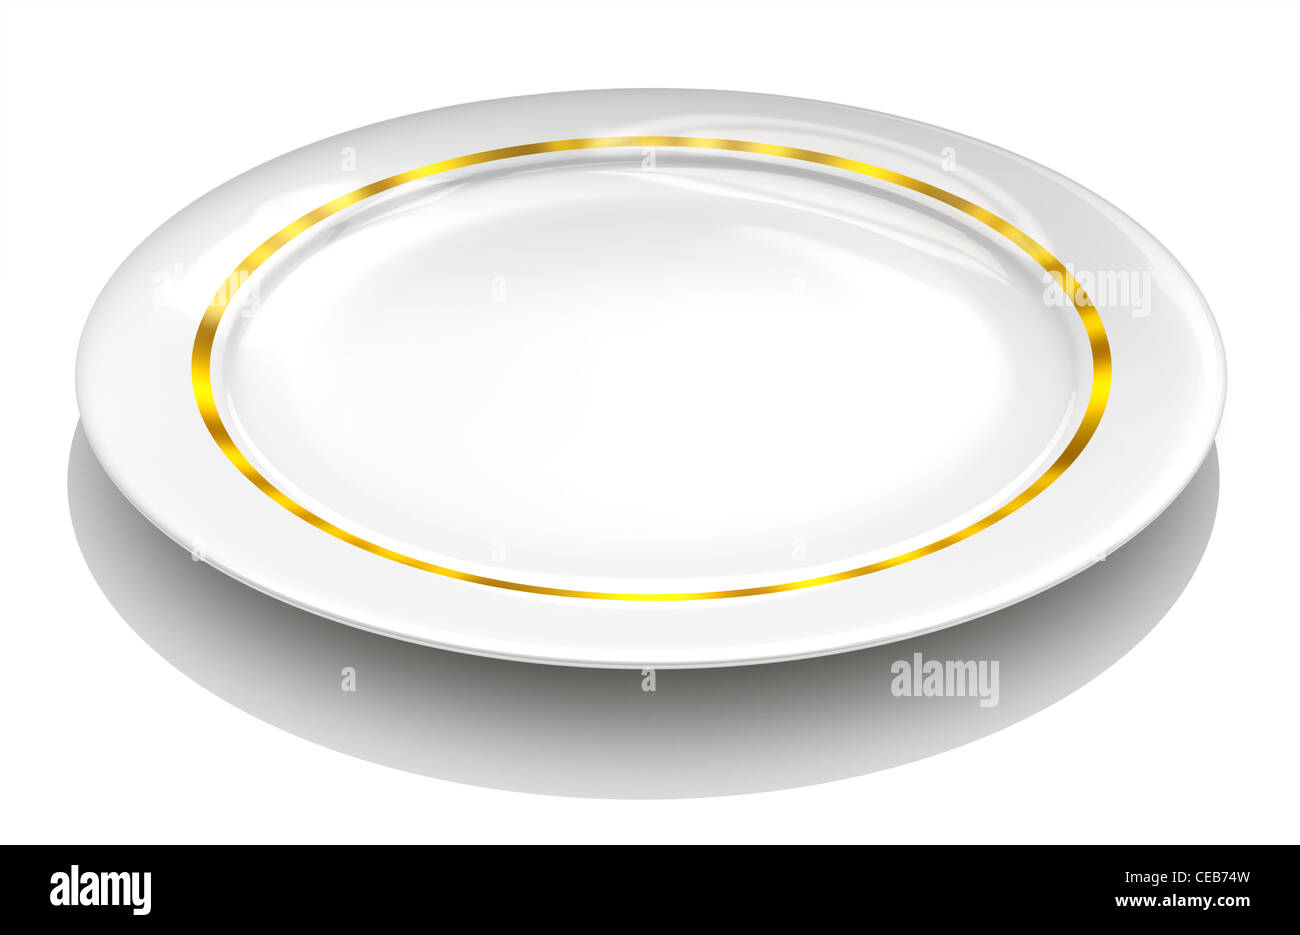 White plate with gold rim Stock Photo